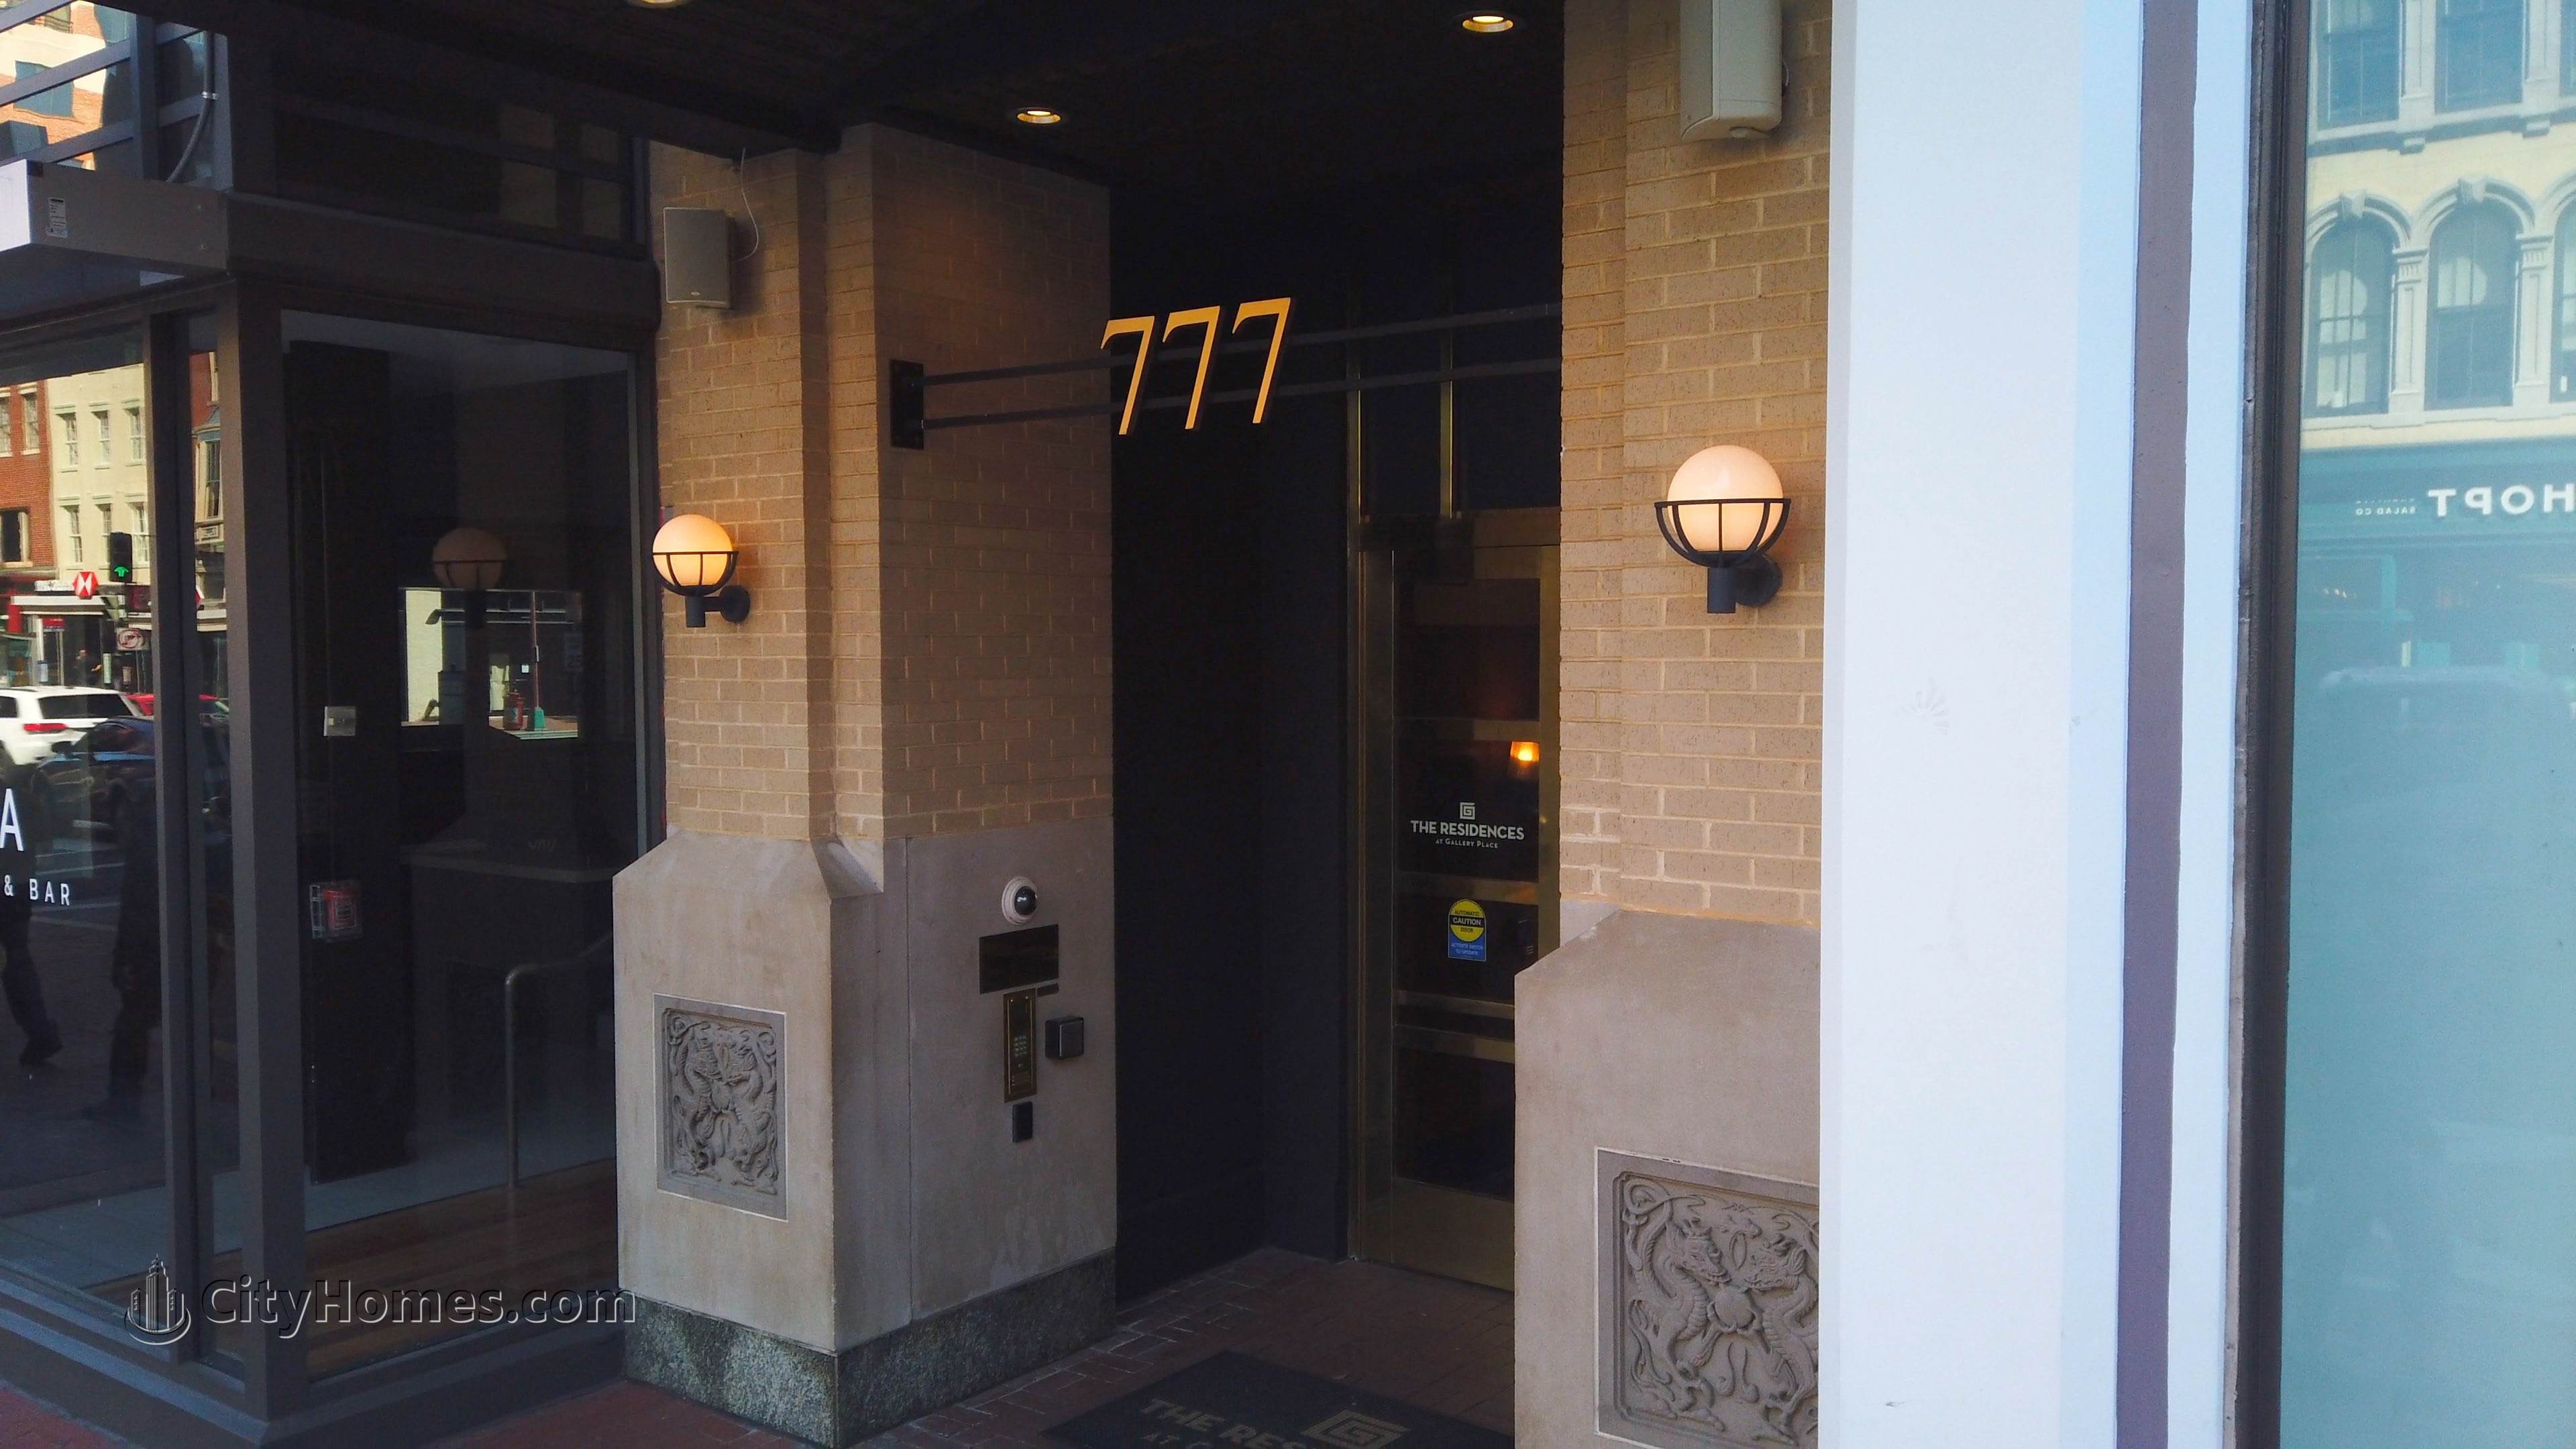 777 7th St NW, Chinatown, Washington, DC 20001에 Residences at Gallery Place 건물